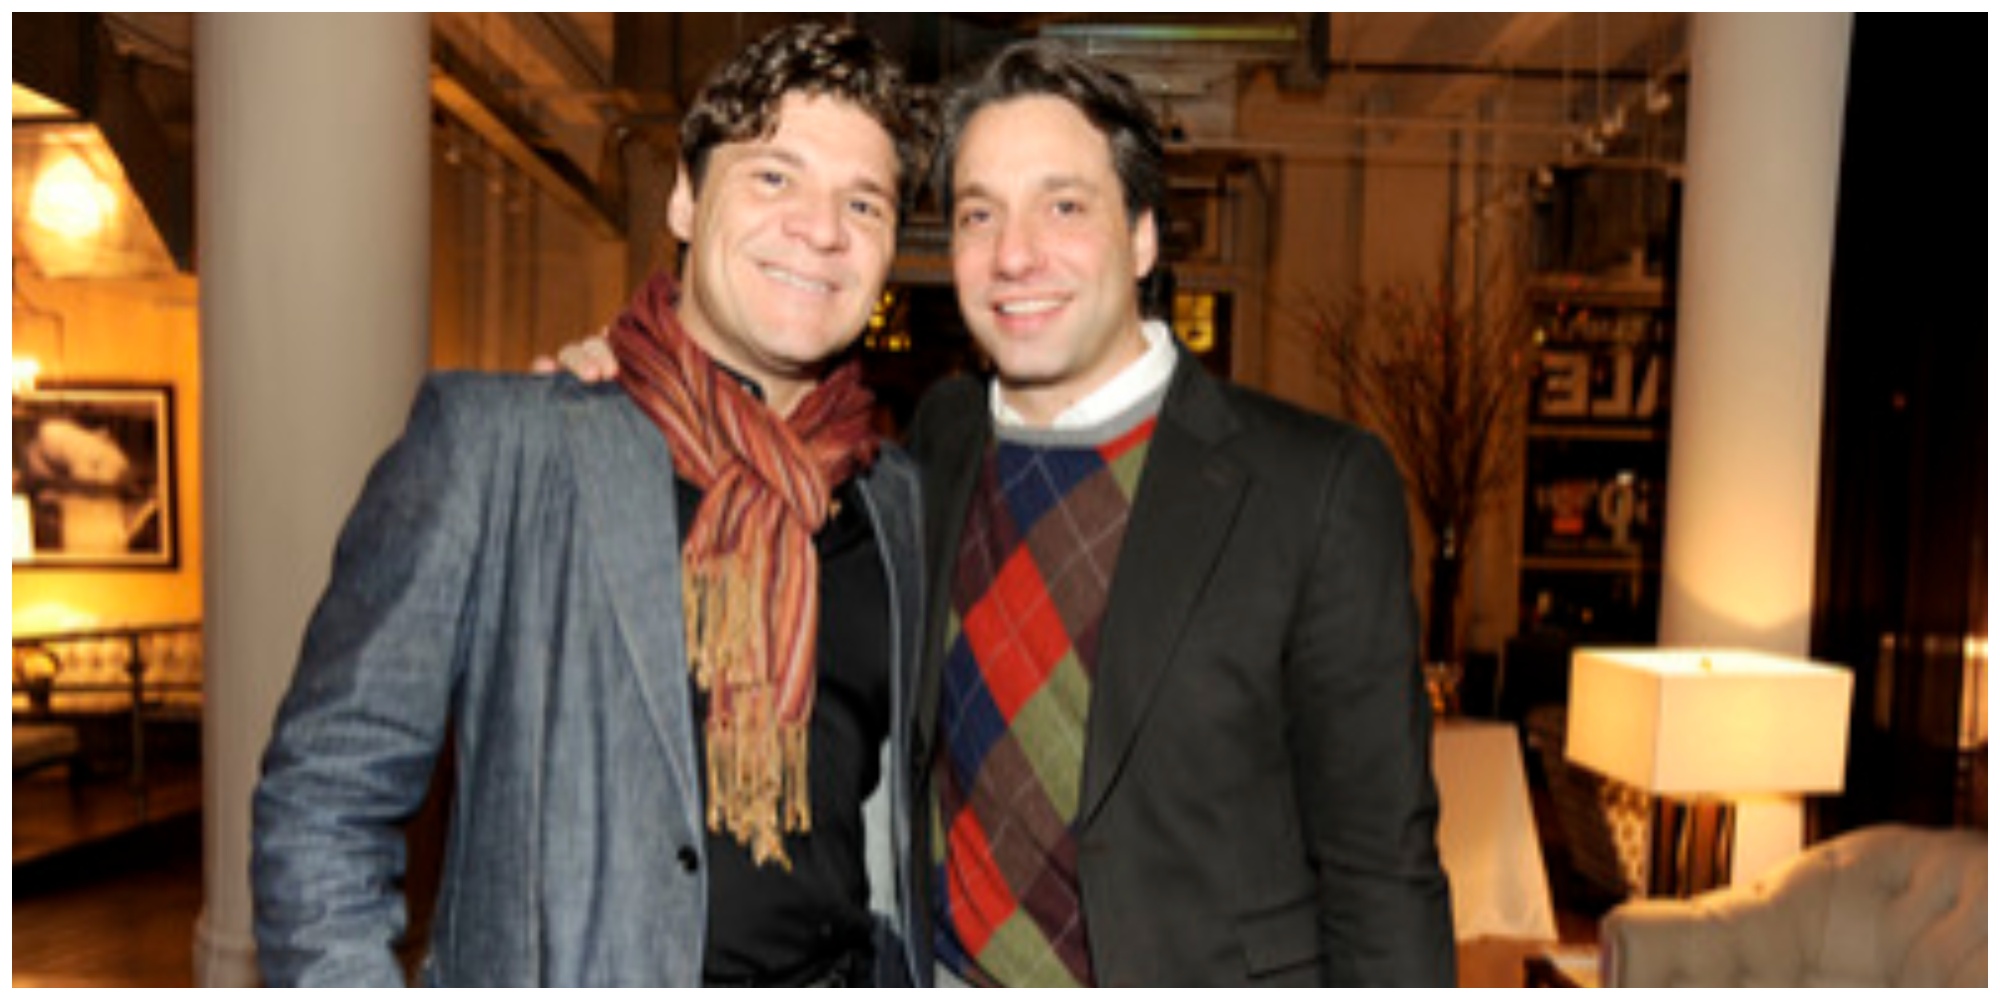 Thom Filicia with his partner Greg Calejo